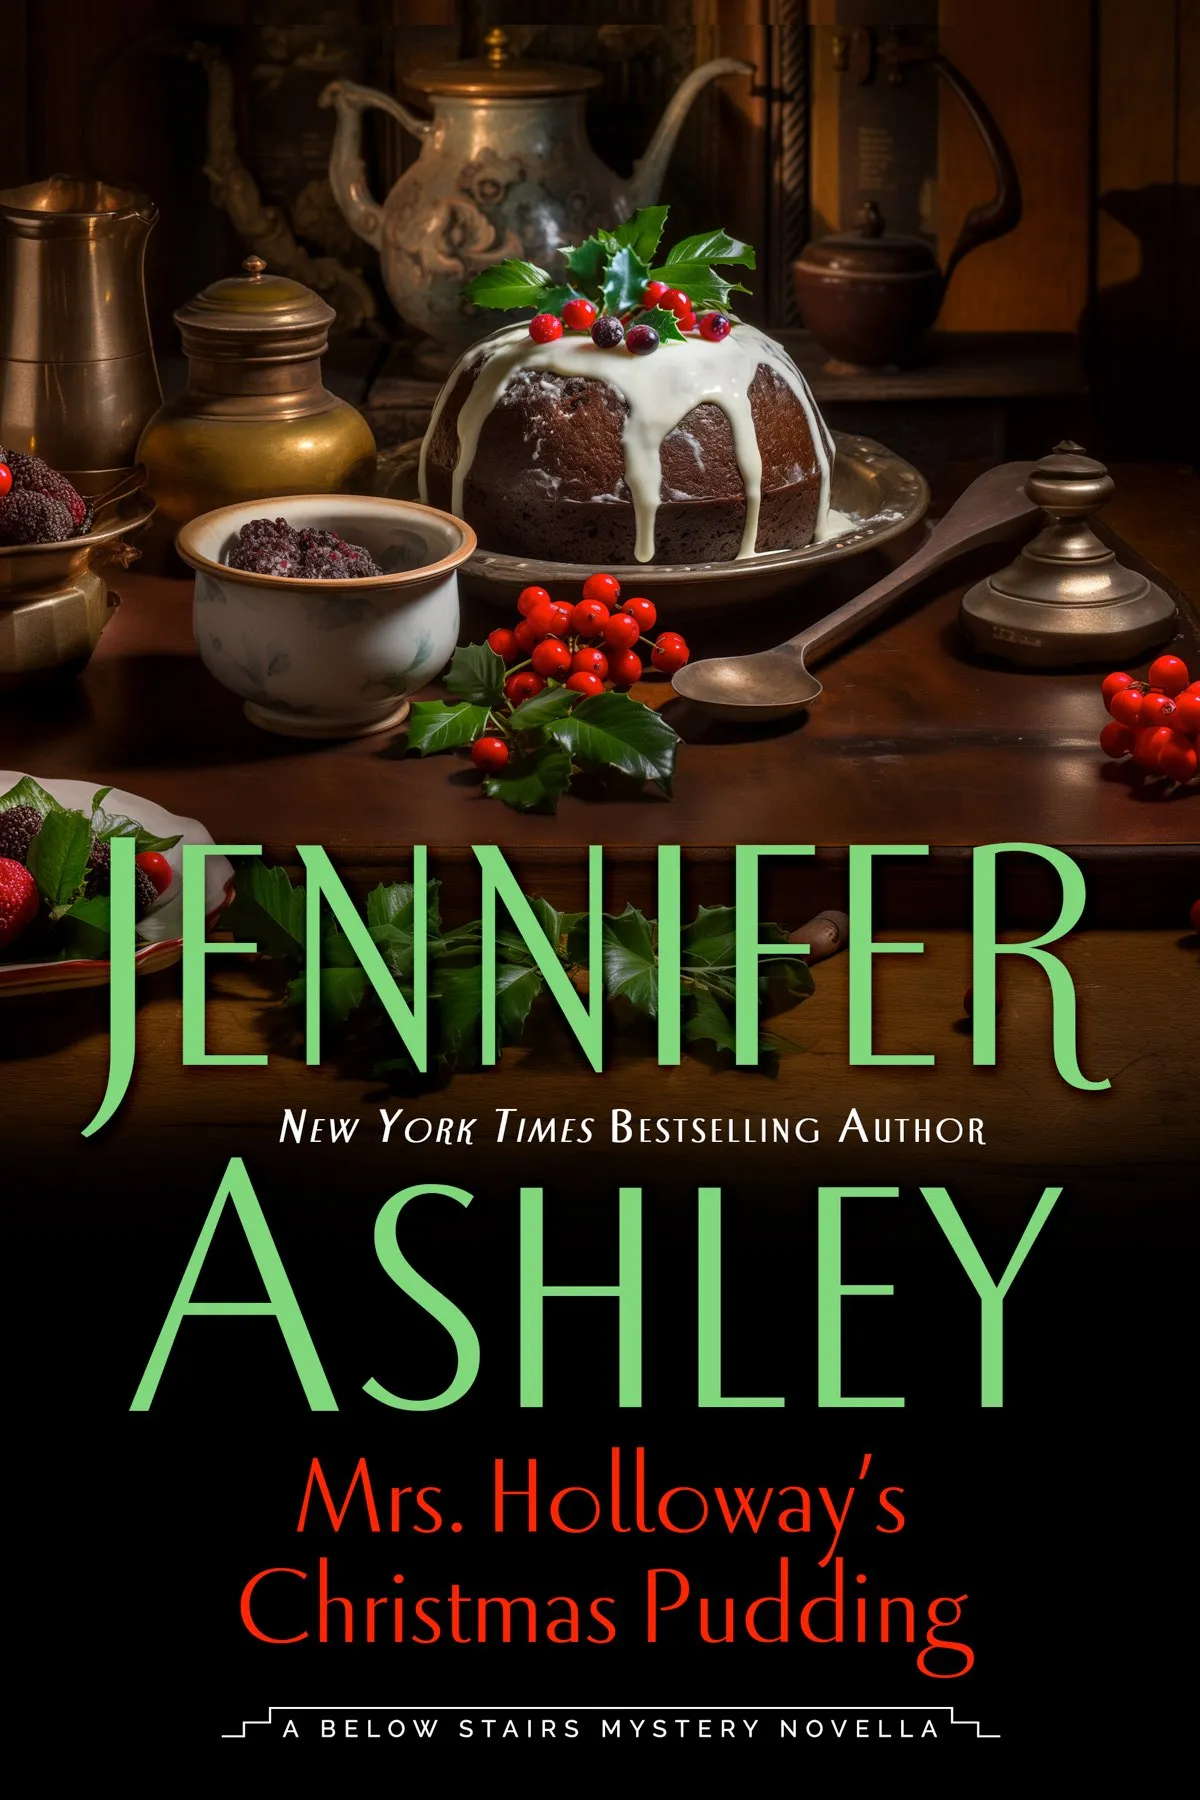 Mrs. Holloway's Christmas Pudding (Below Stairs Mysteries)